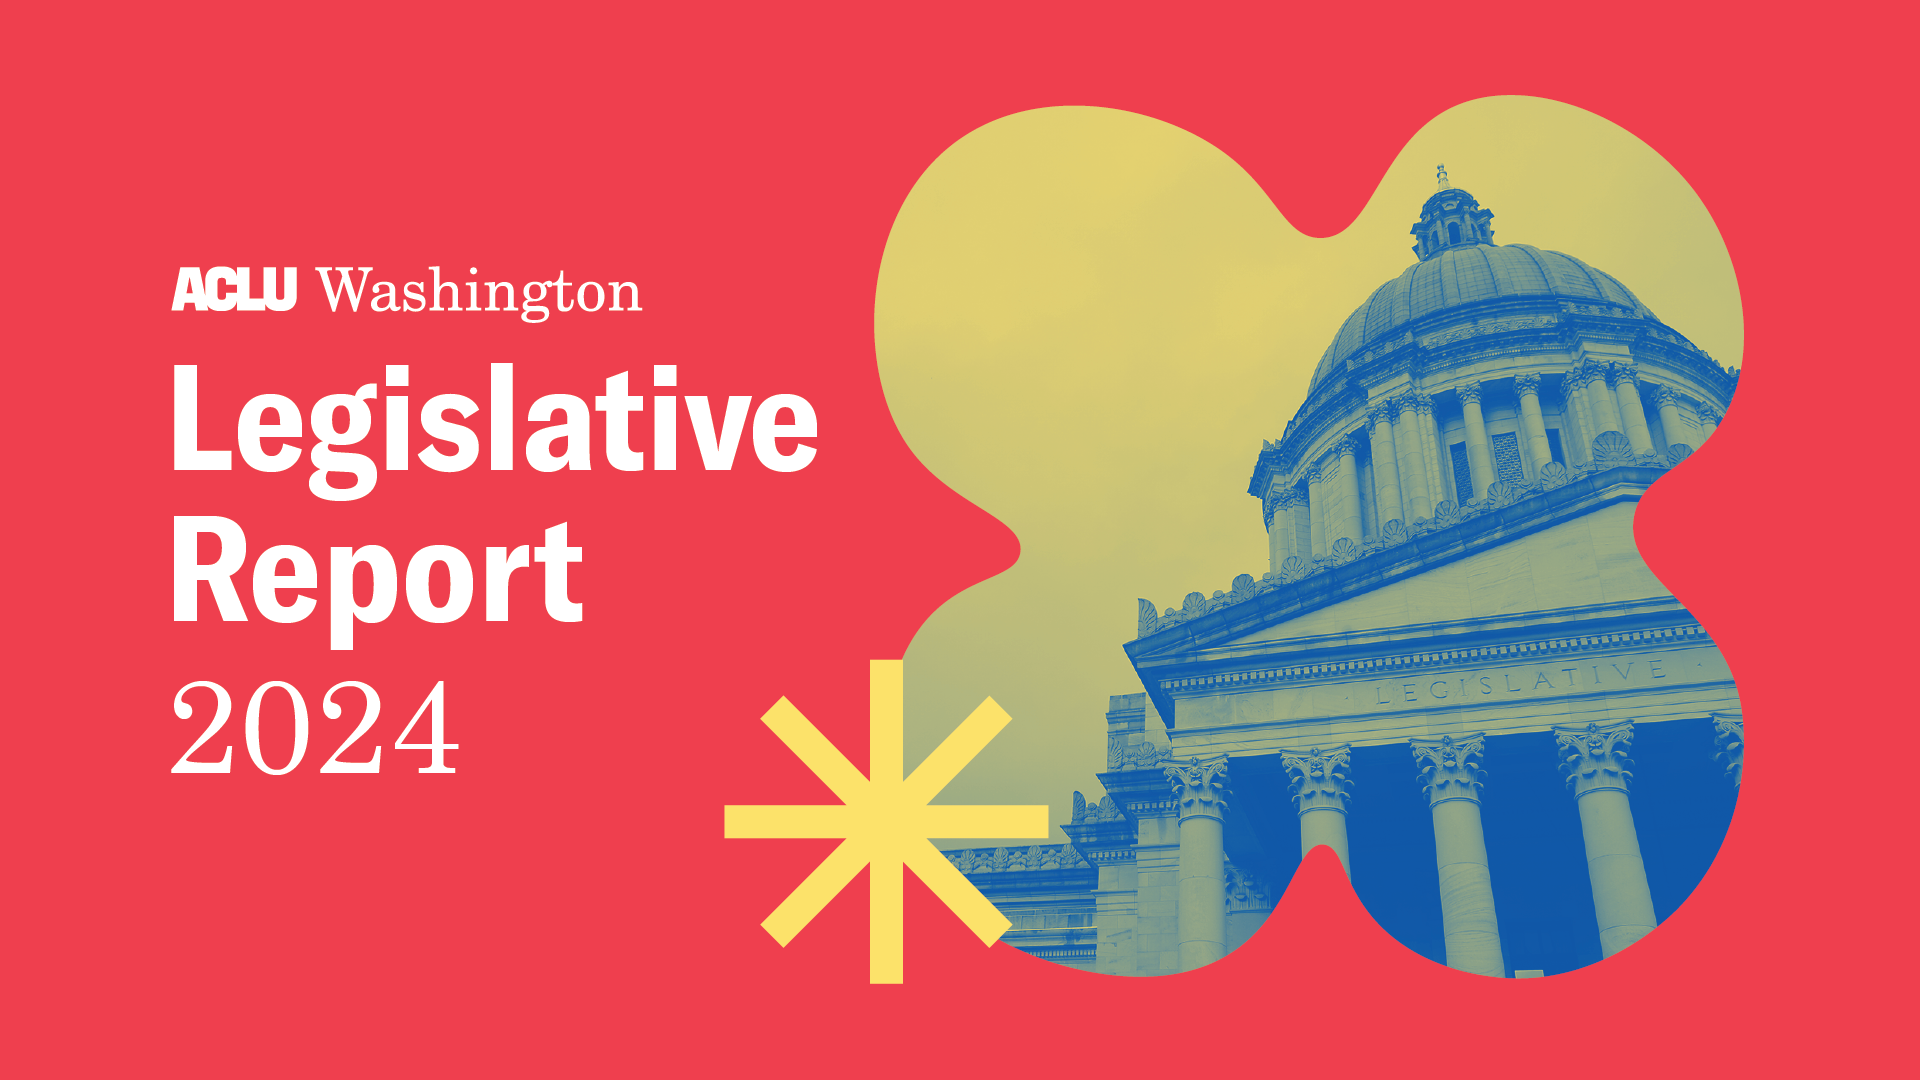 ACLU of Washington Legislative Report 2024 red graphic with a yellow and blue legislative builting 